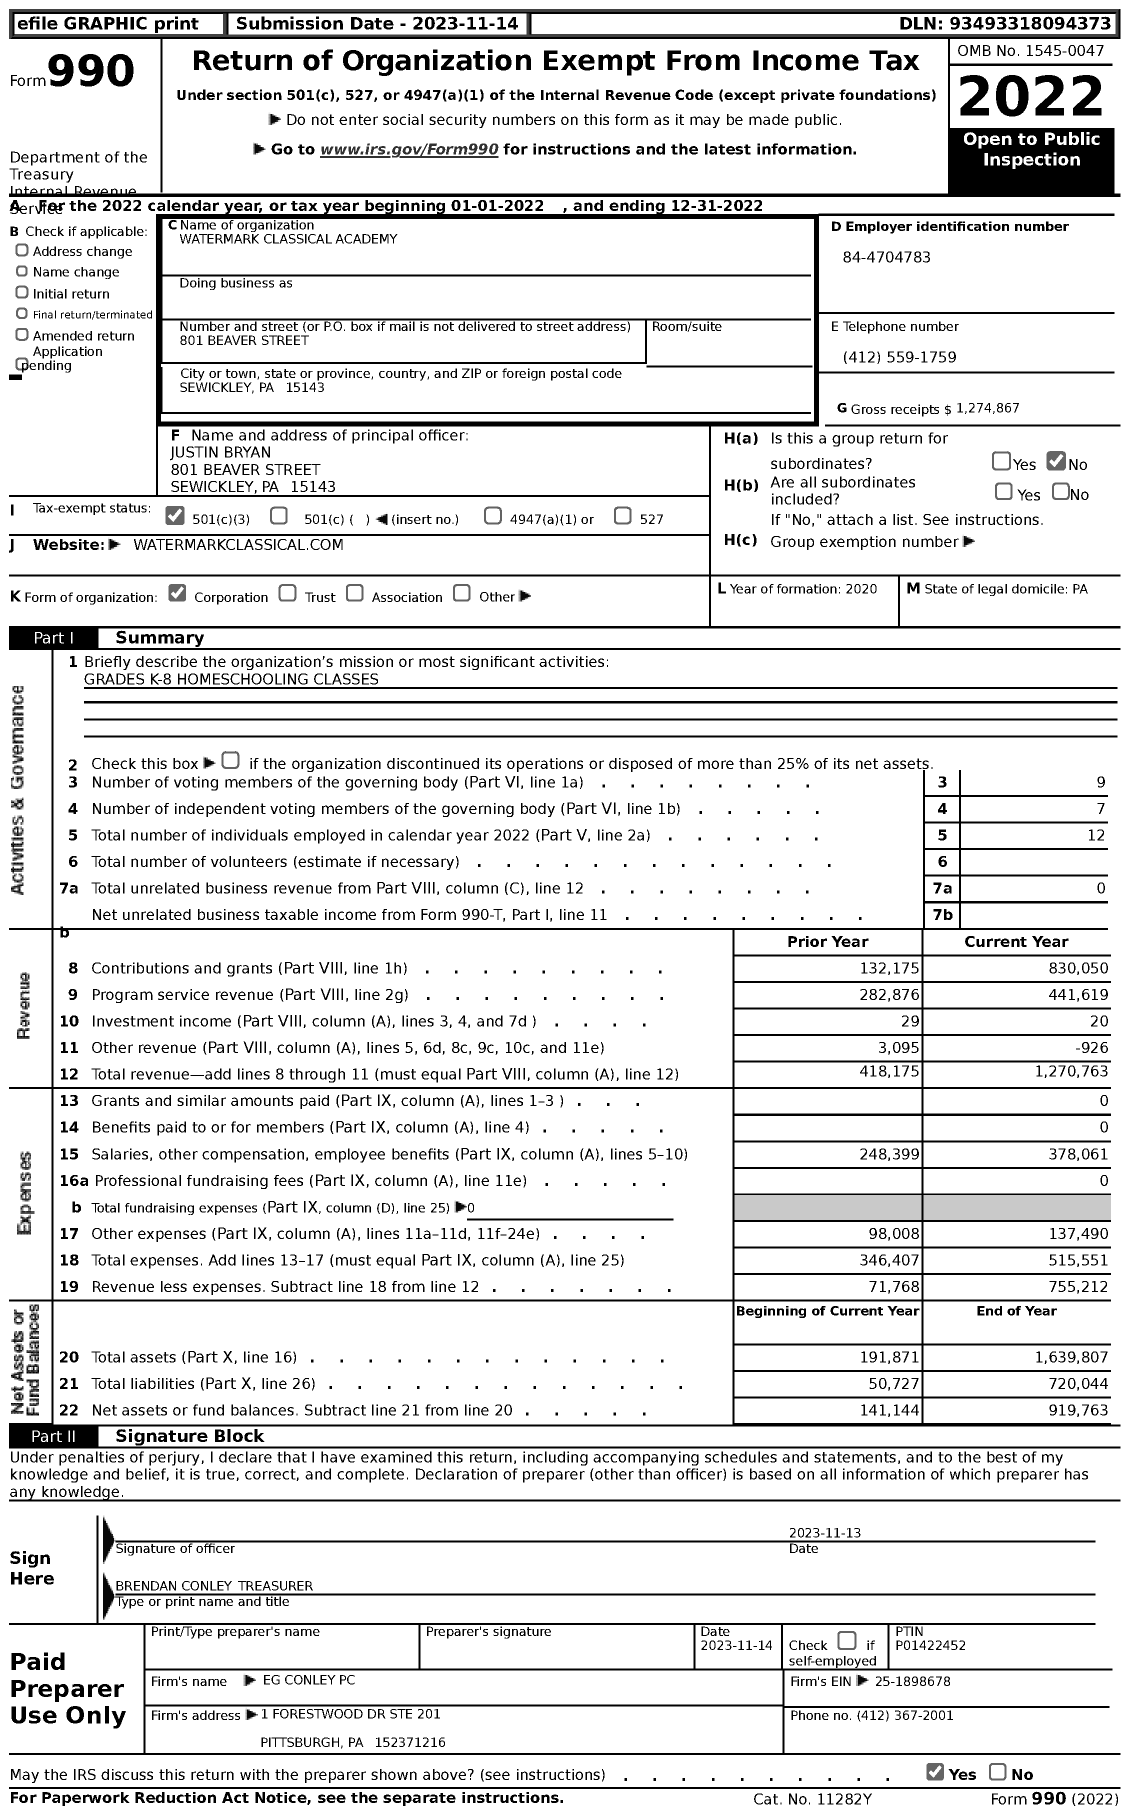 Image of first page of 2022 Form 990 for Watermark Classical Academy